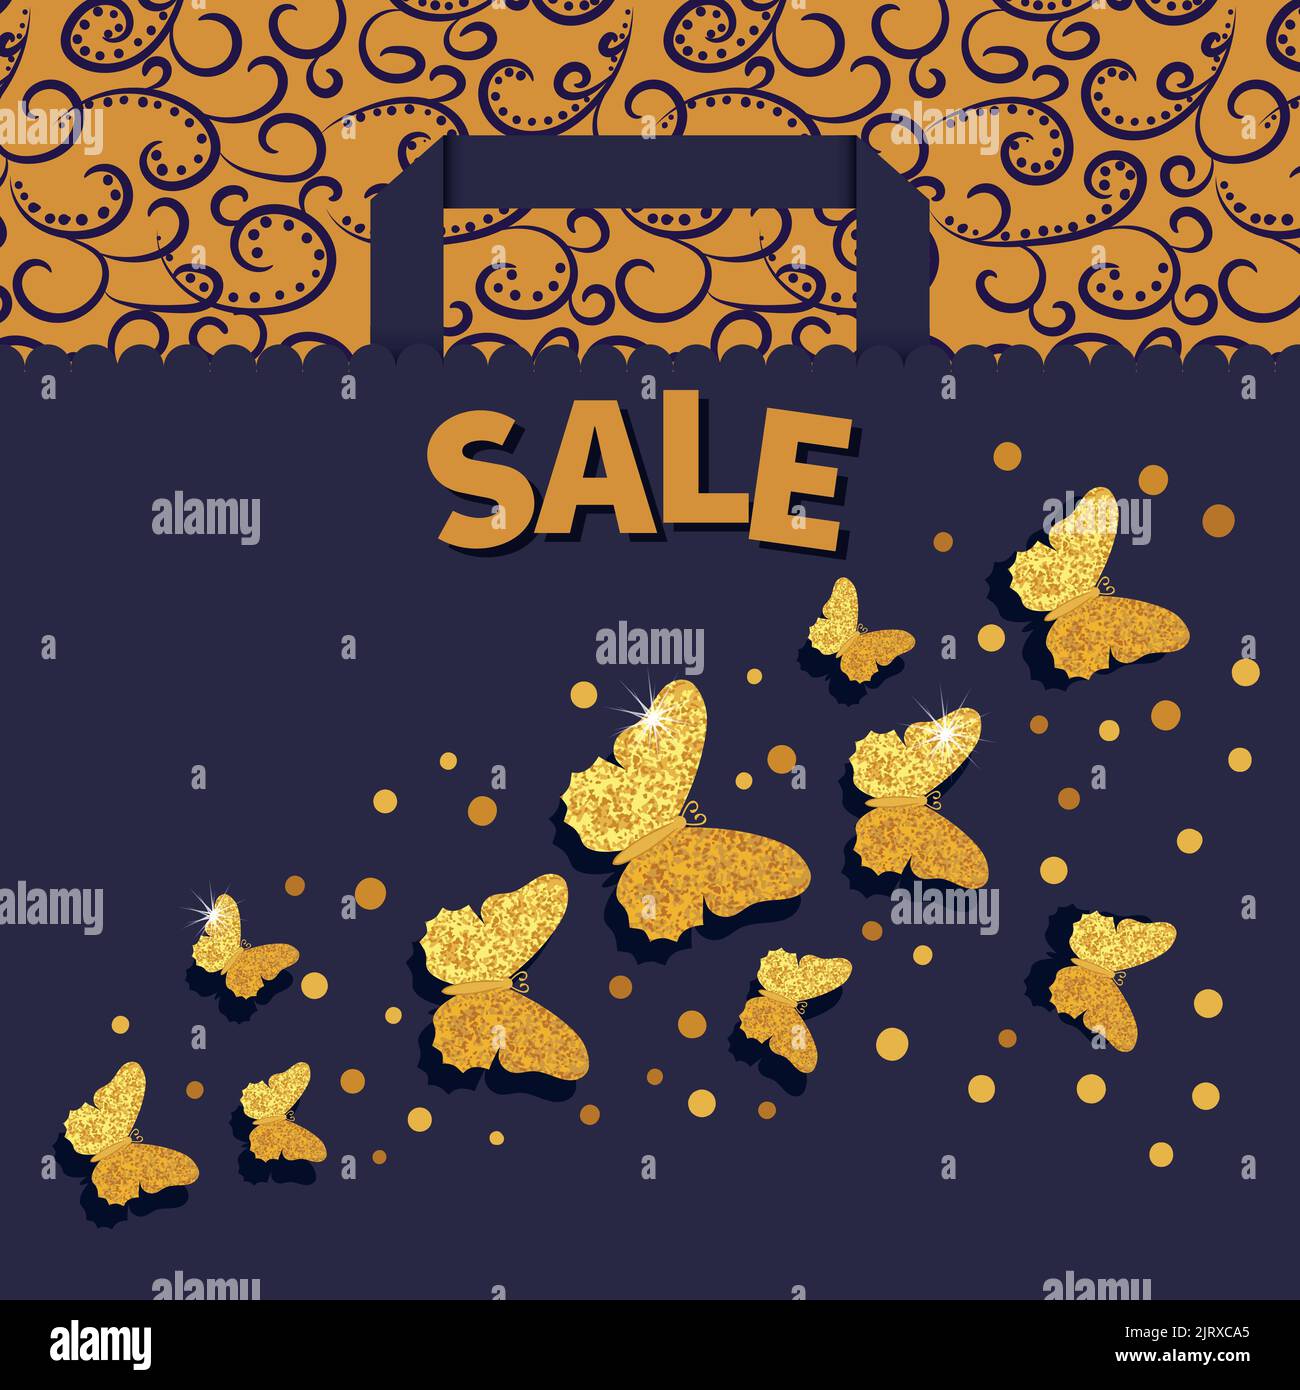 Luxury sale background with golden glittering butterflies. Discount vector illustration with paper shopping bag. Can be used as sale poster, banner Stock Vector